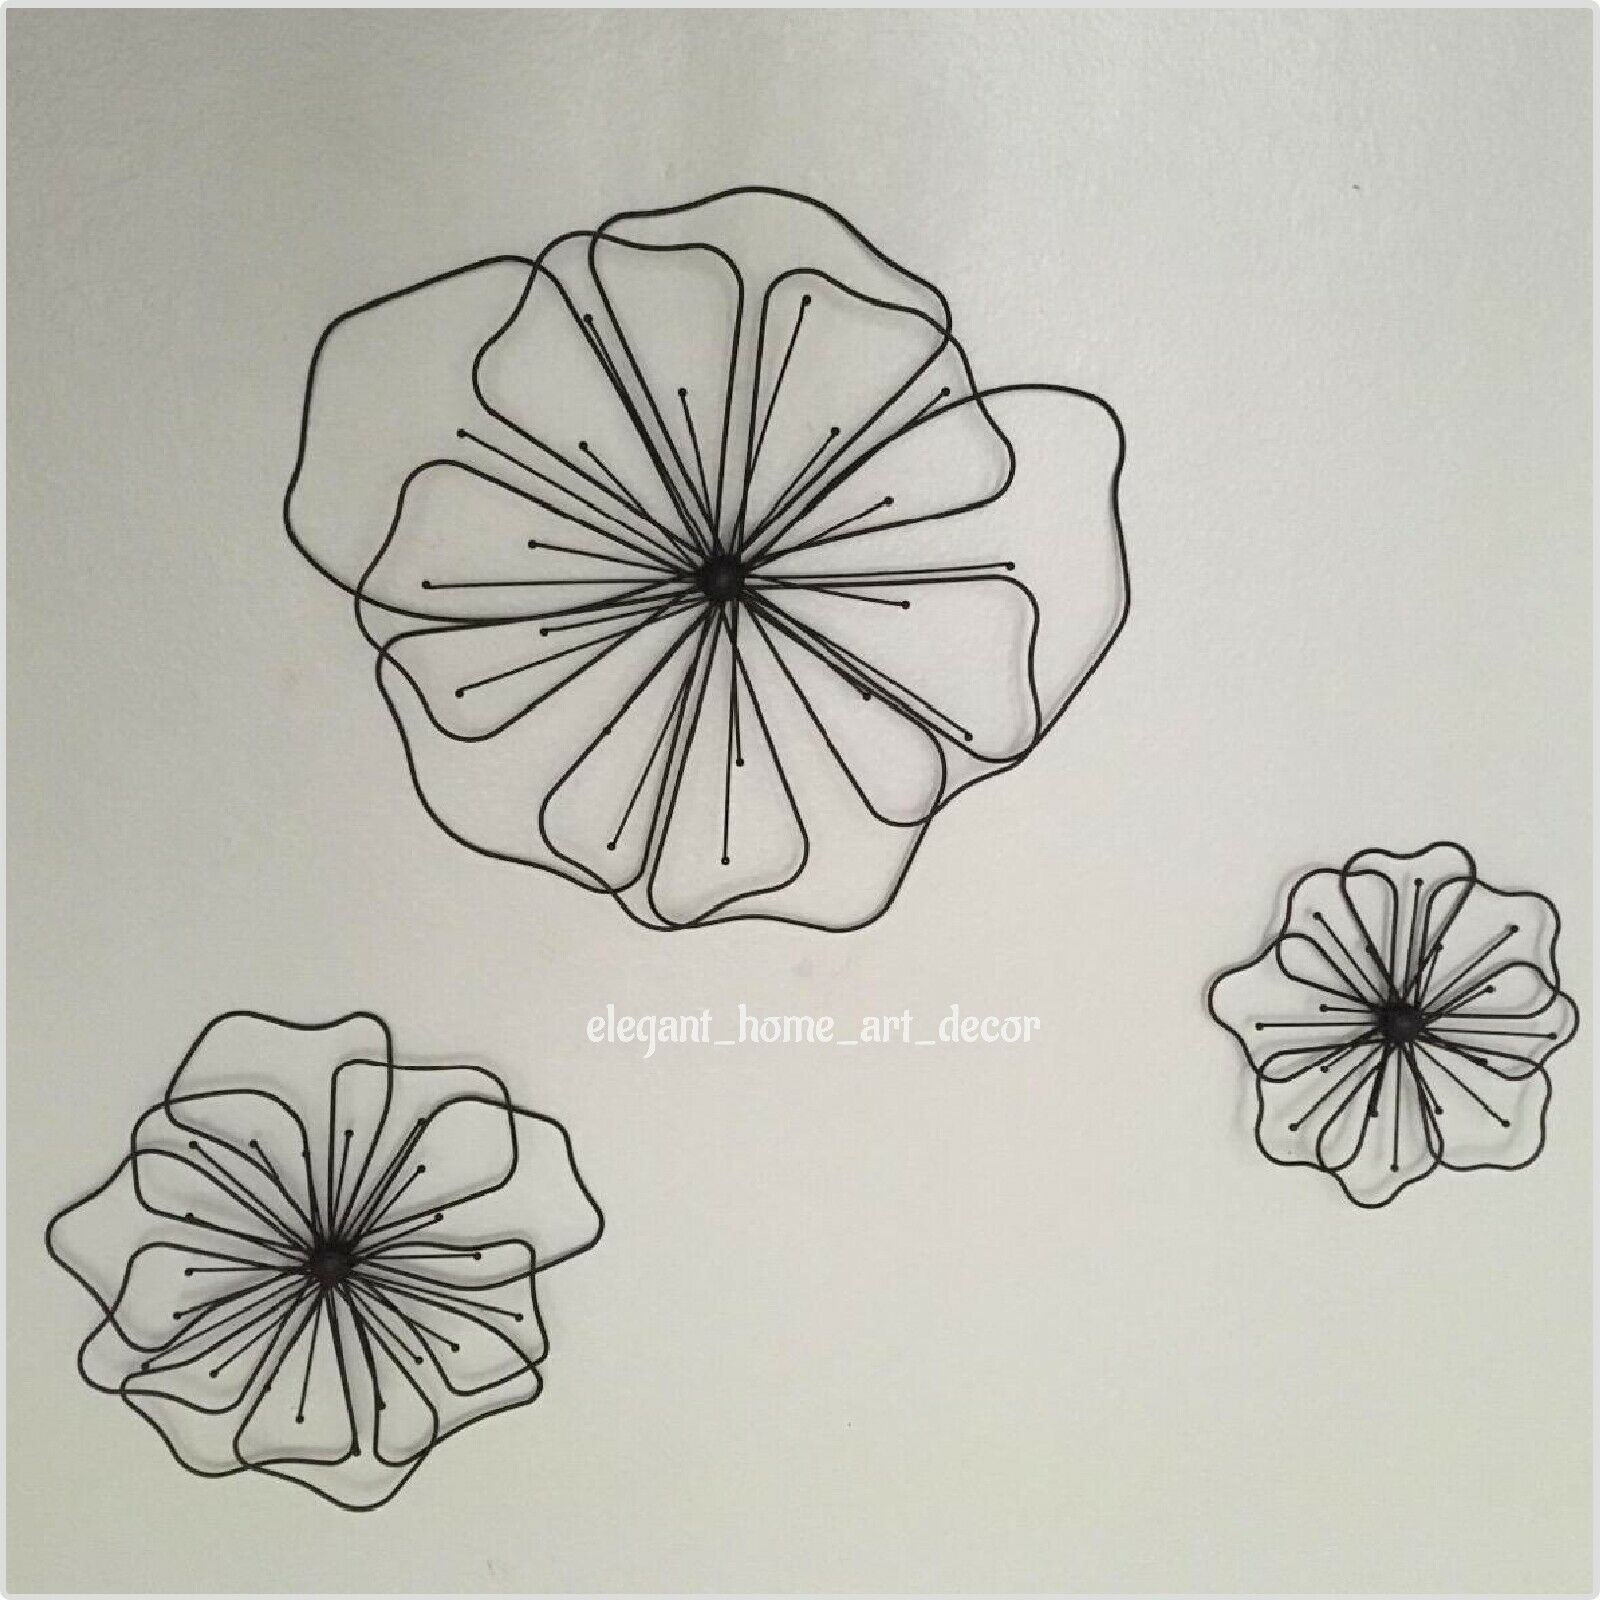 Details About Rustic Metal Flower Wall Decor Abstract Set Of 3 Wire Wall  Sculpture Home Garden Regarding Metal Flower Wall Decor (set Of 3) (View 7 of 30)